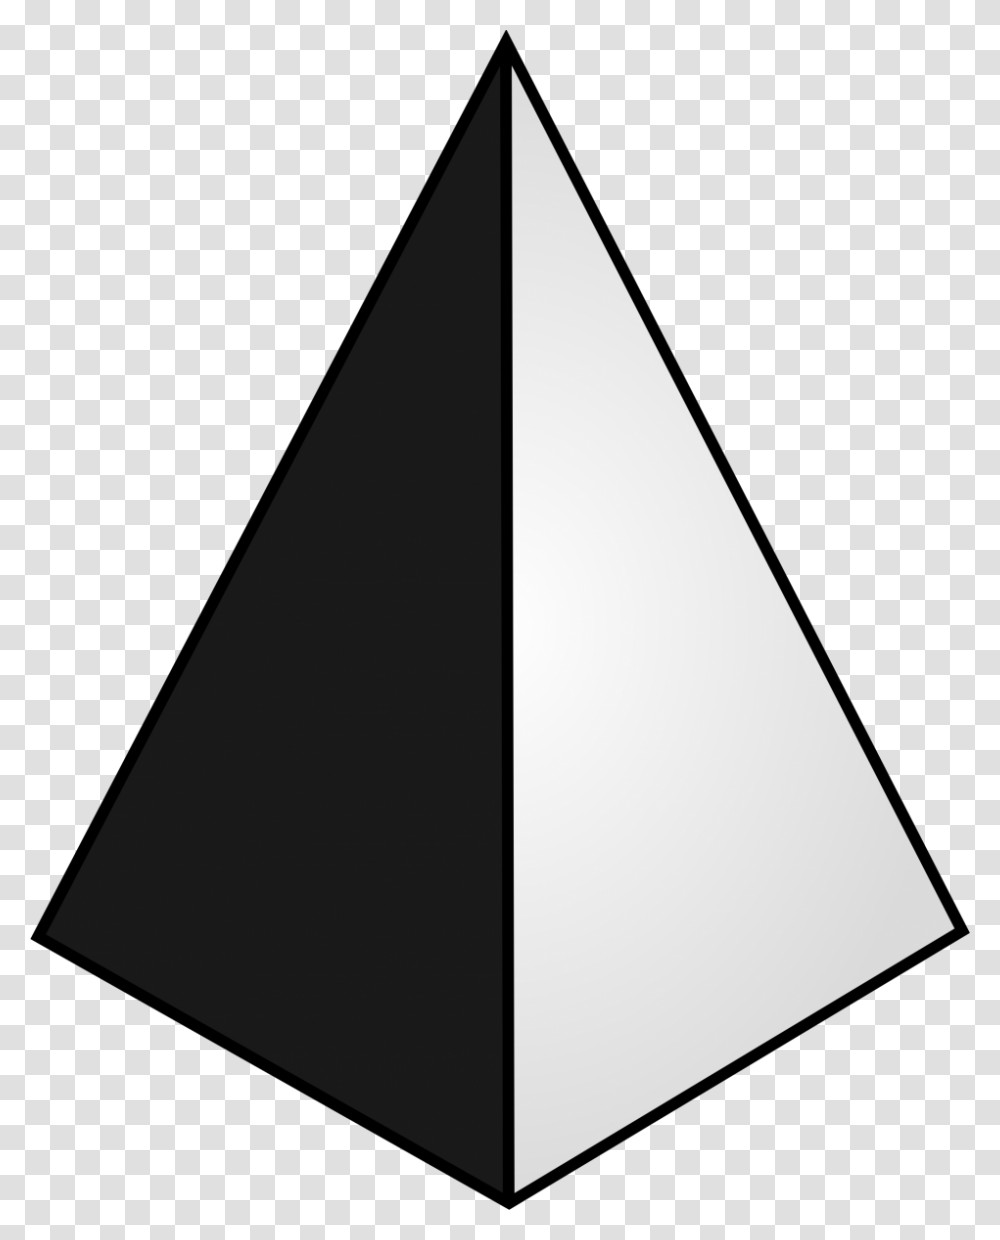 Black And White Pyramid, Triangle, Lighting, Cone, Metropolis Transparent Png